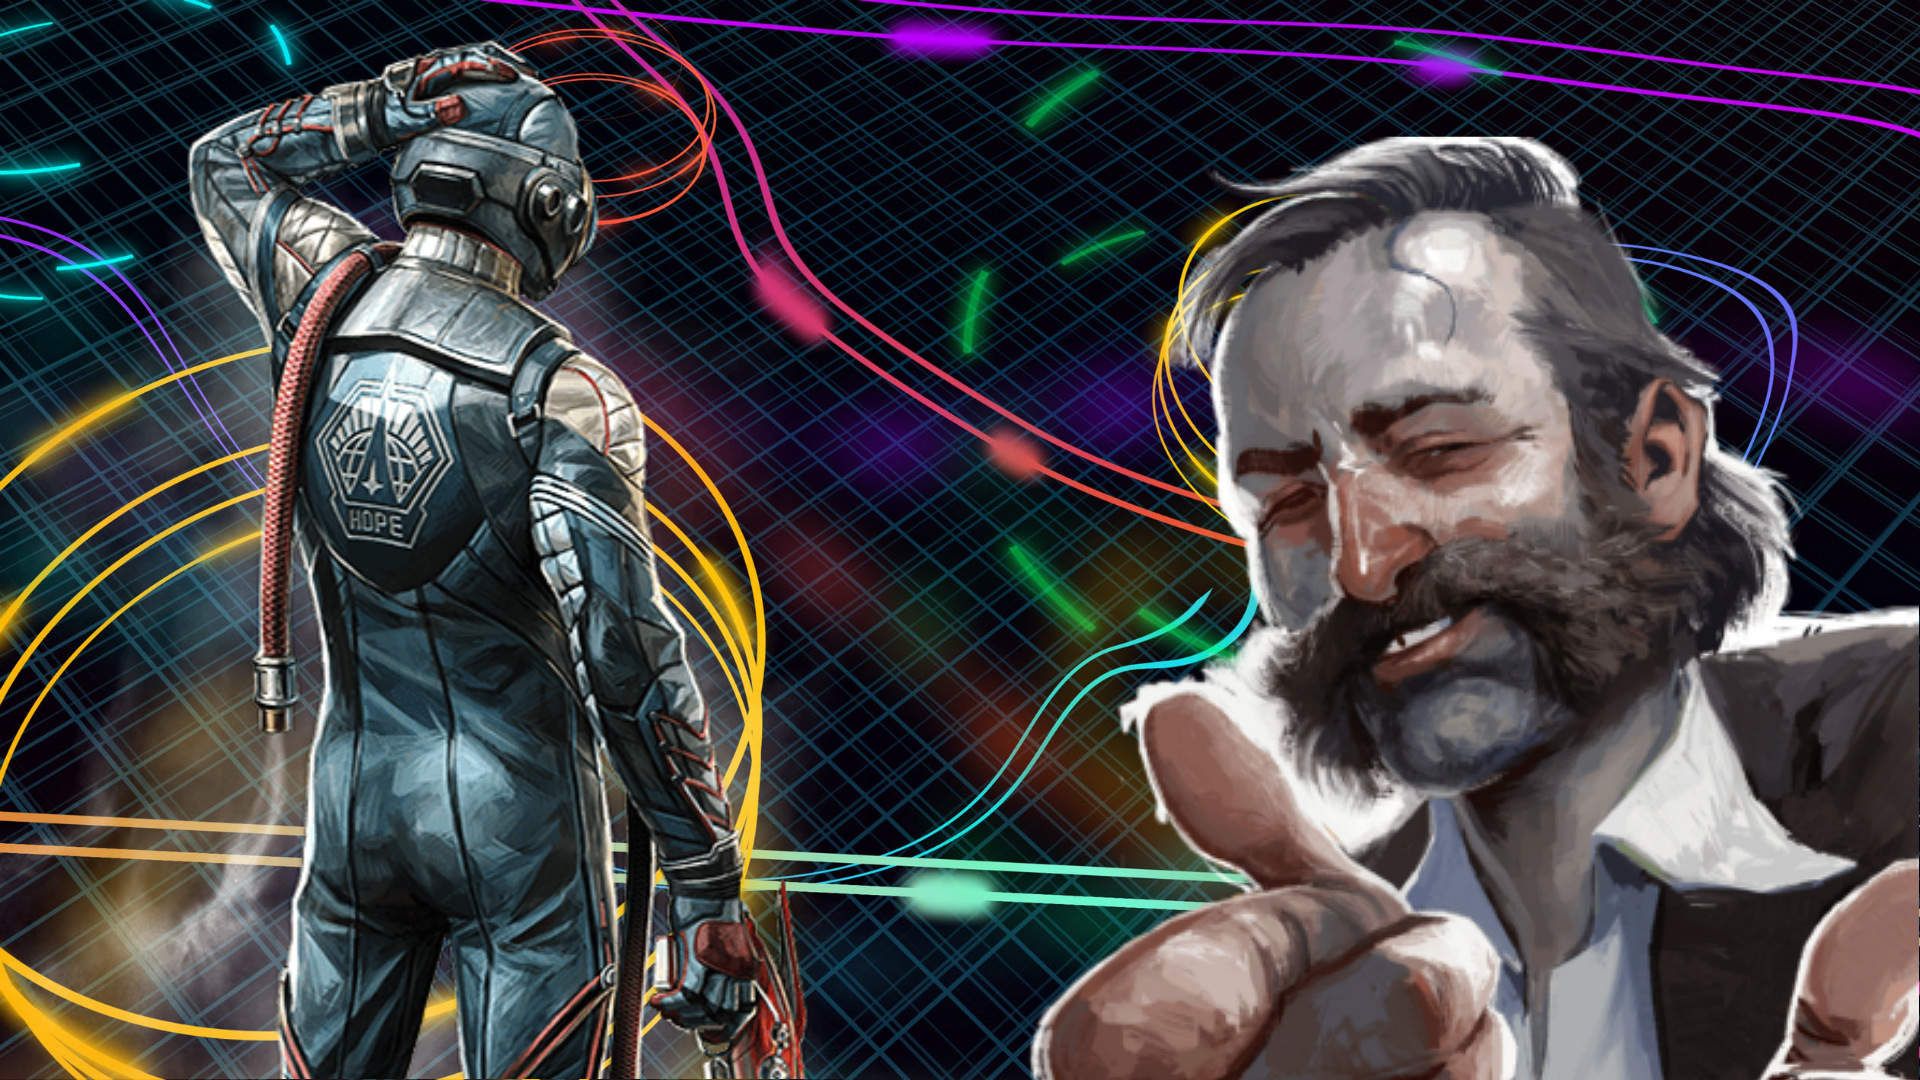 Disco Elysium dev seeks artists with a love of scifi and video games   Eurogamernet